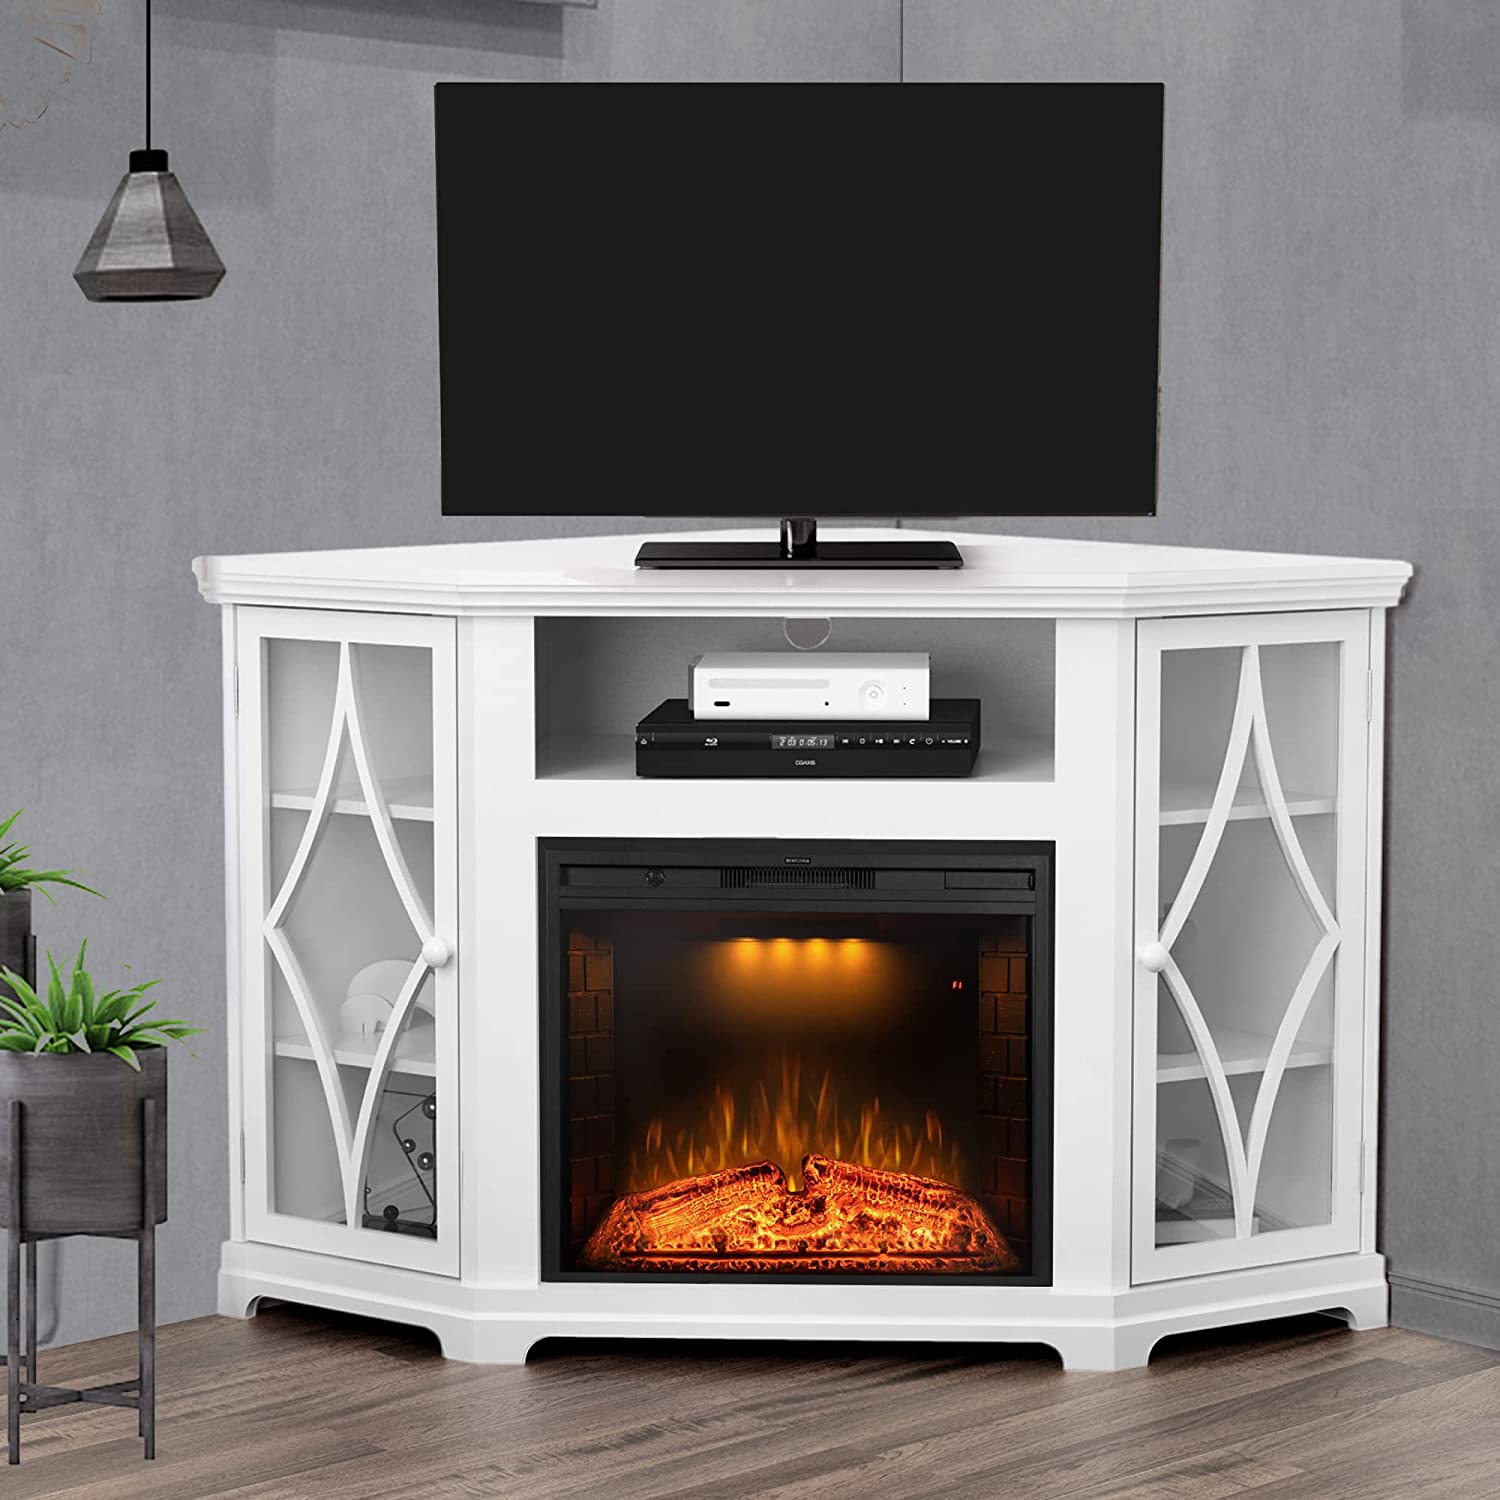 56" Corner Fireplace TV Stand for TV's up to 65 Inches, 25" Electric Fireplace, White